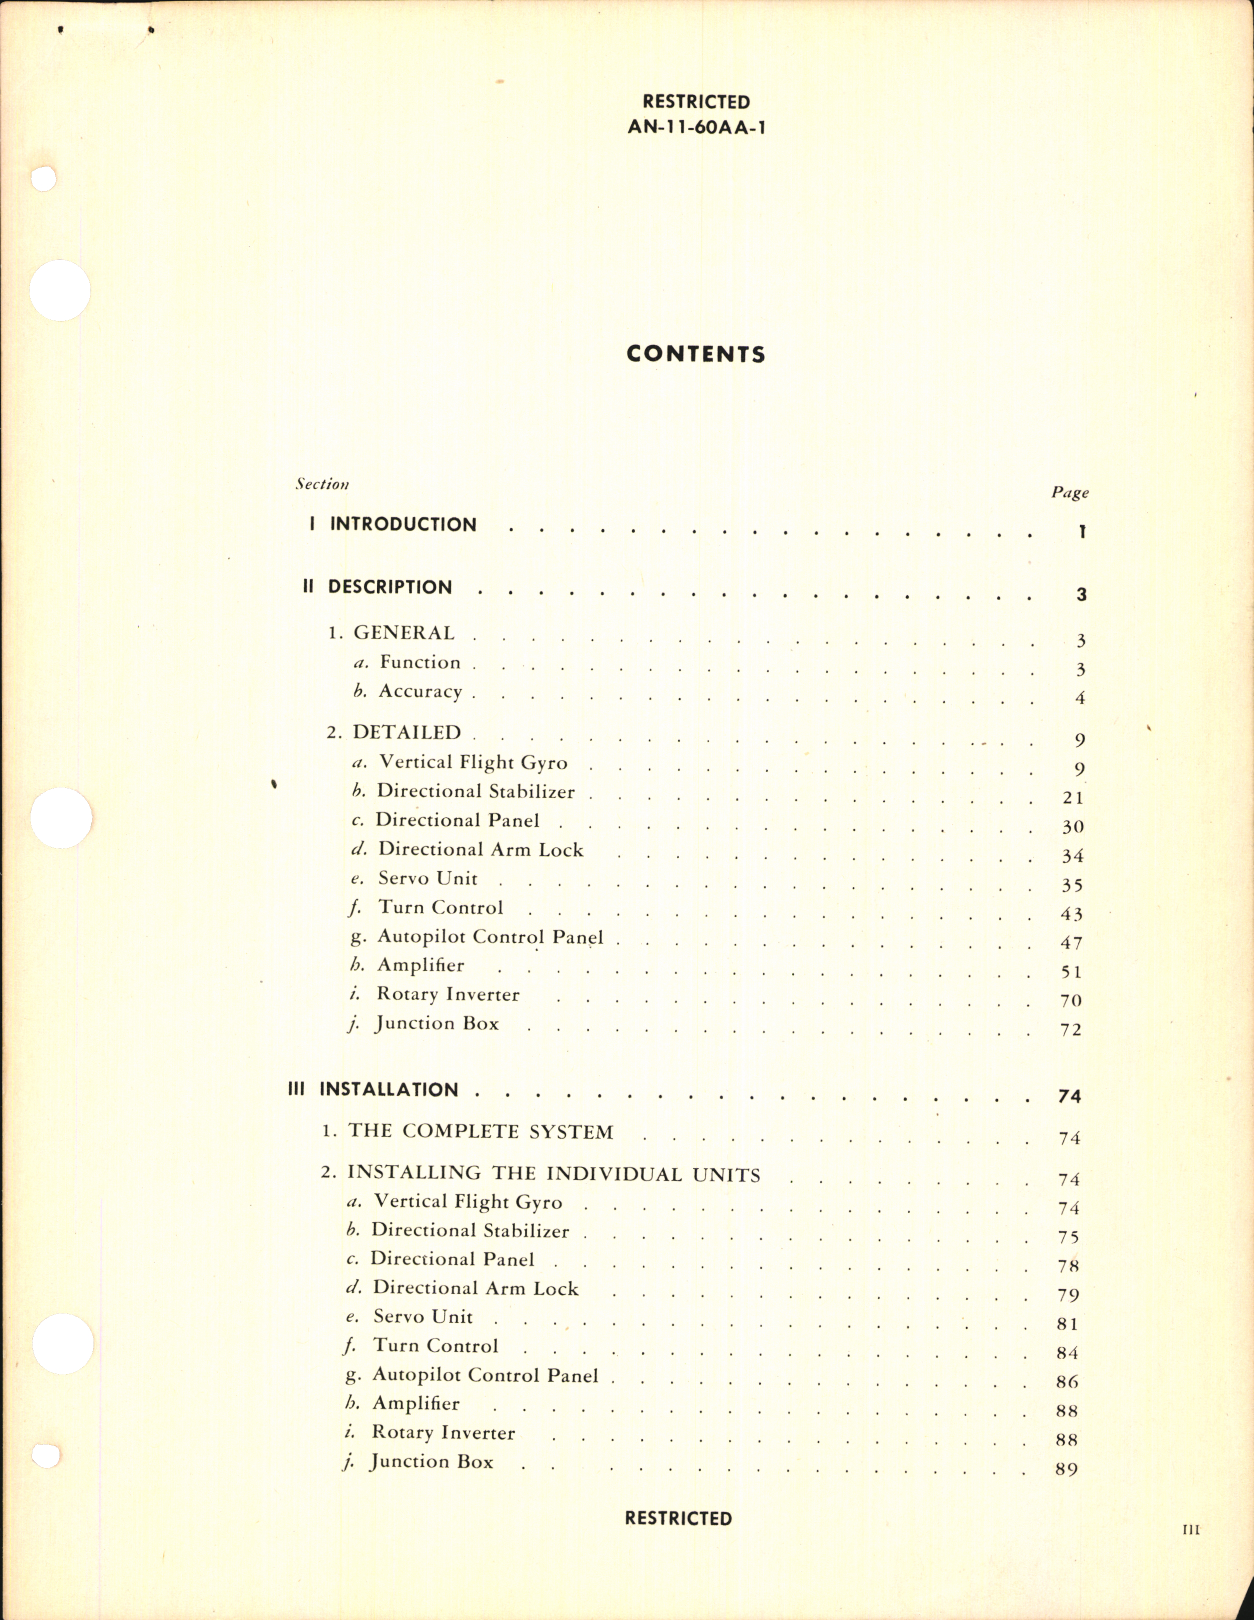 Sample page 3 from AirCorps Library document: Handbook of Operation and Service Instructions for Automatic Pilot Type C-1